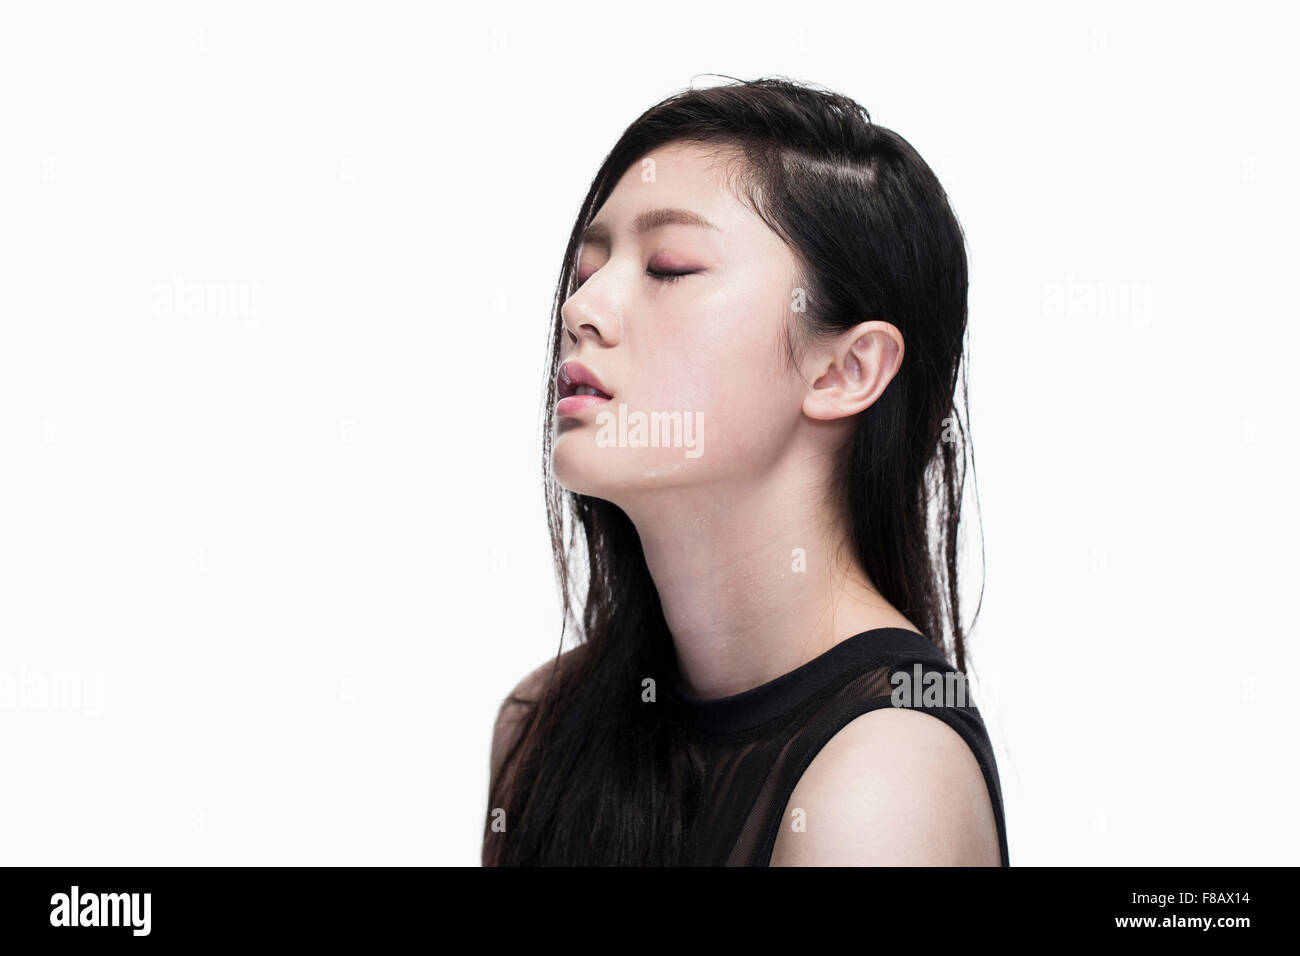 Side view potrait of young woman closing eyes Stock Photo